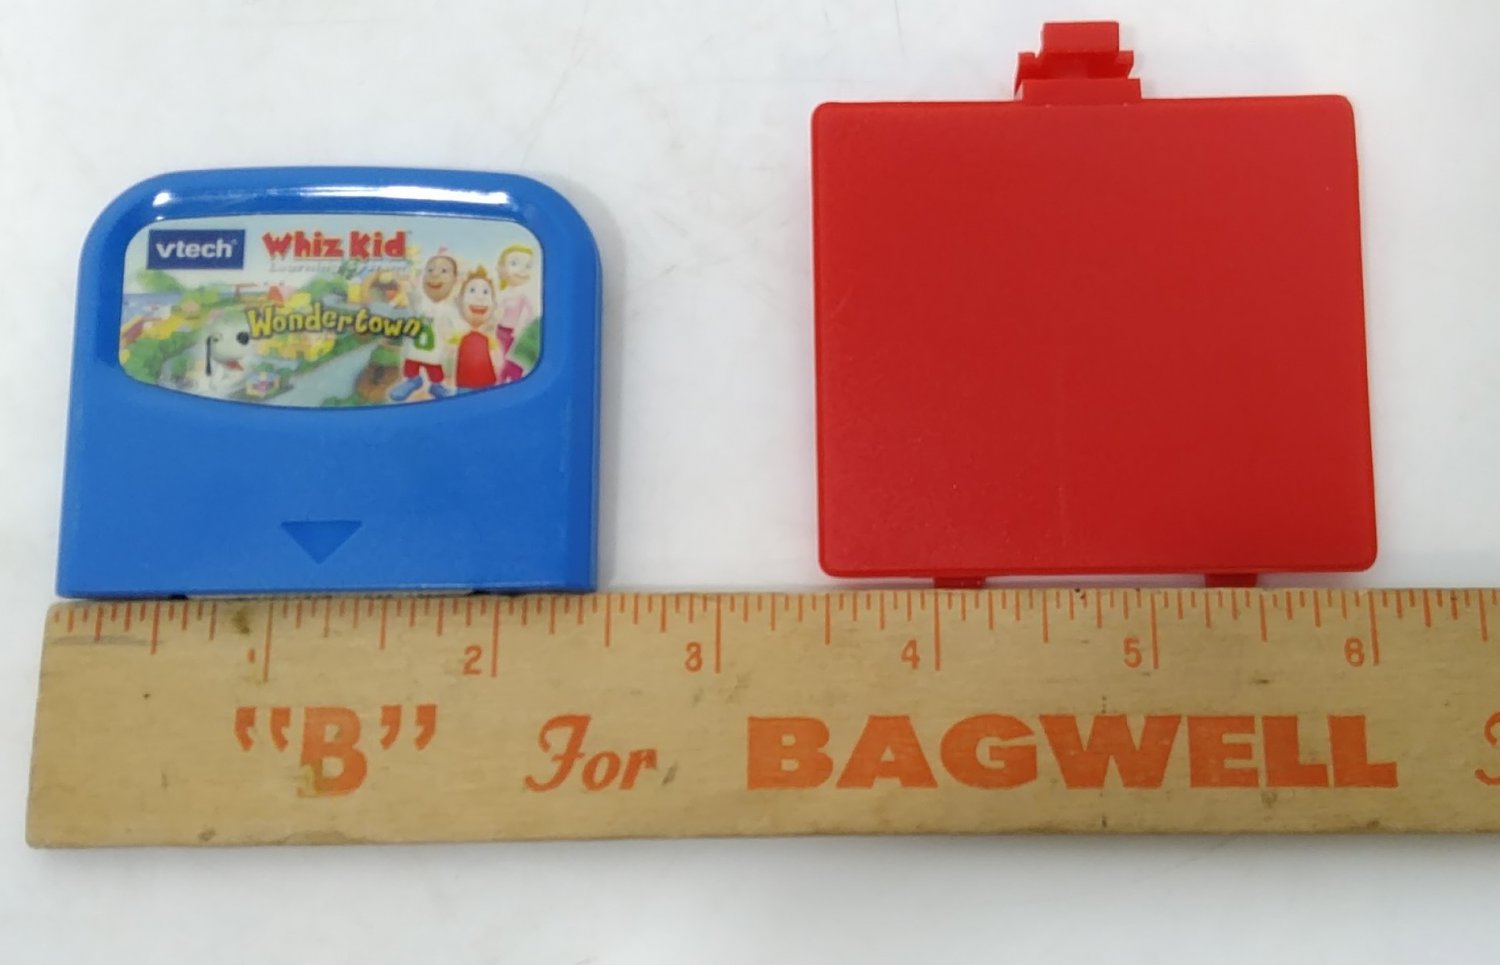 Vtech Whiz Kid Wonder Town Game and Red Replacement Battery Cover